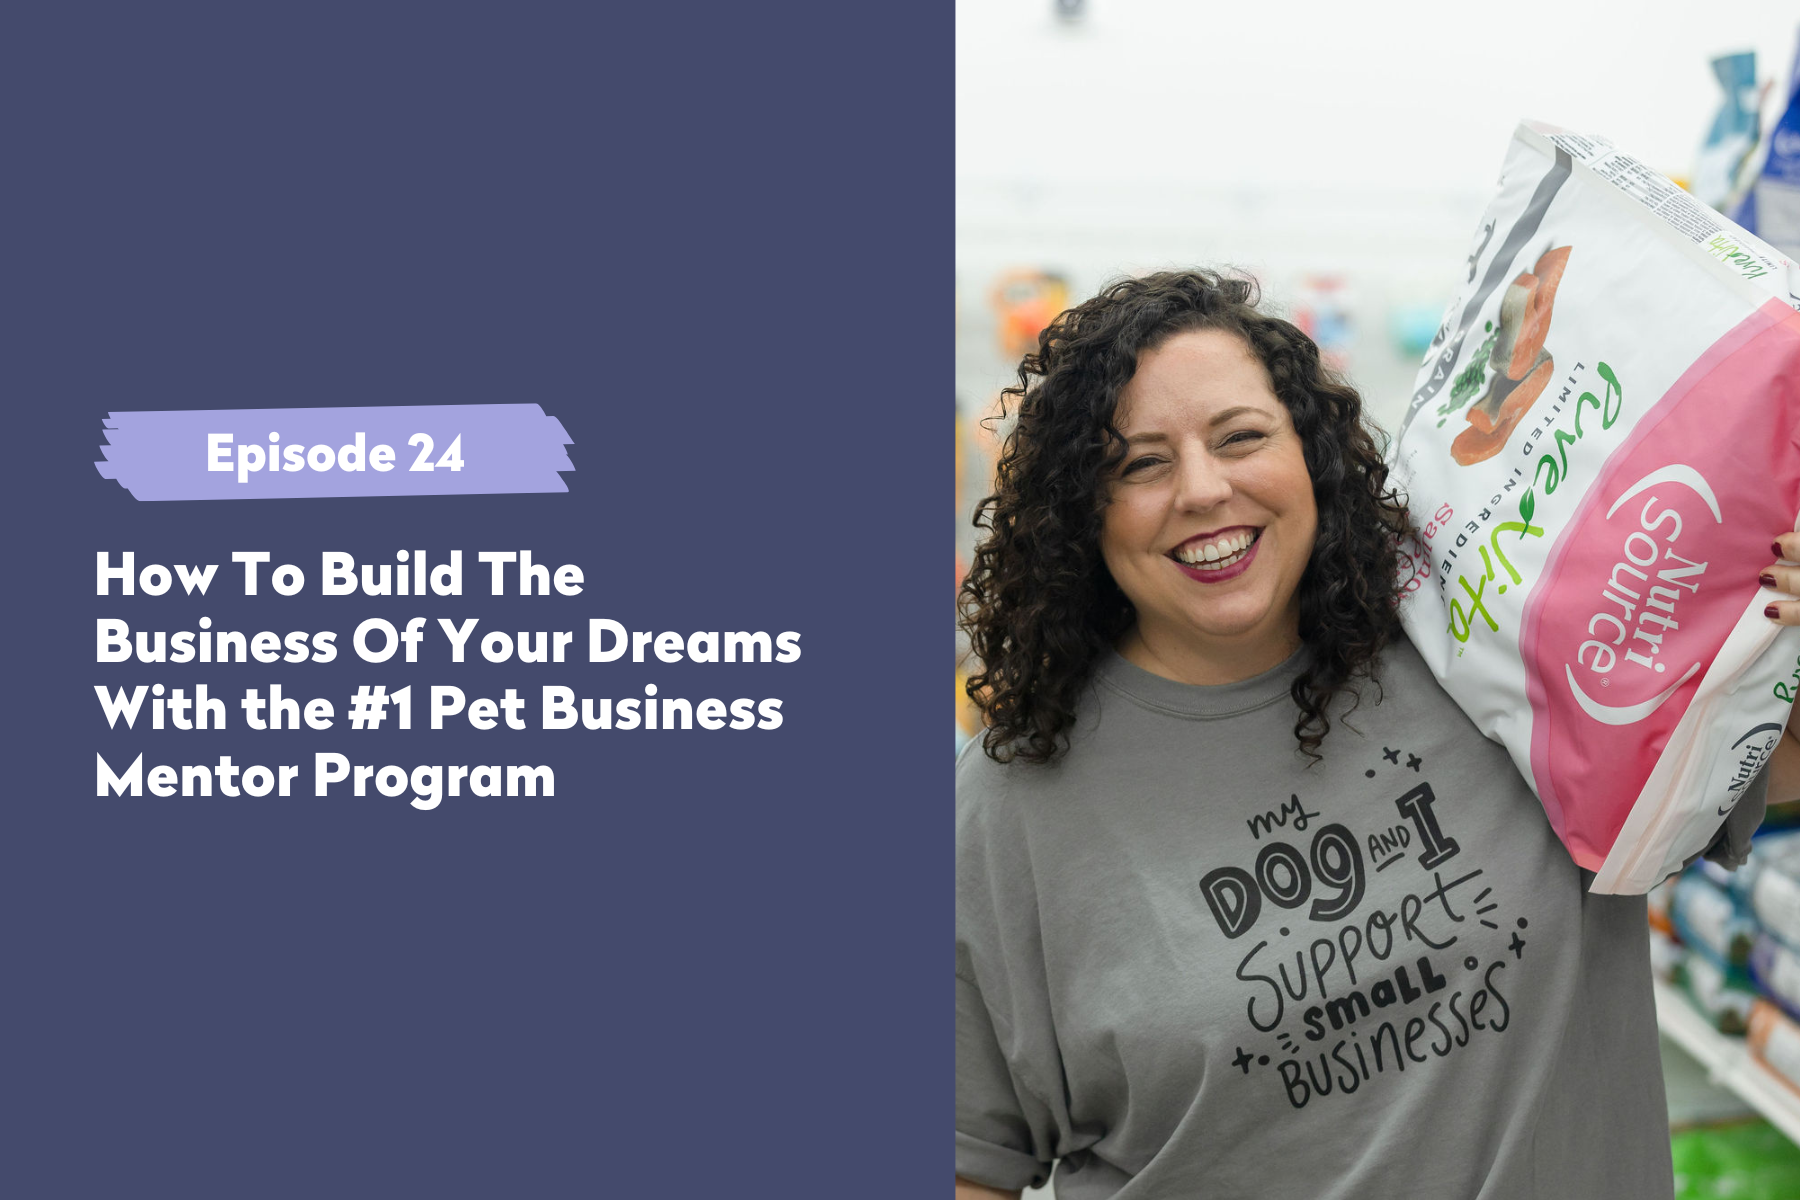 Episode 24 | How To Build The Business Of Your Dreams With the #1 Pet Business Mentor Program